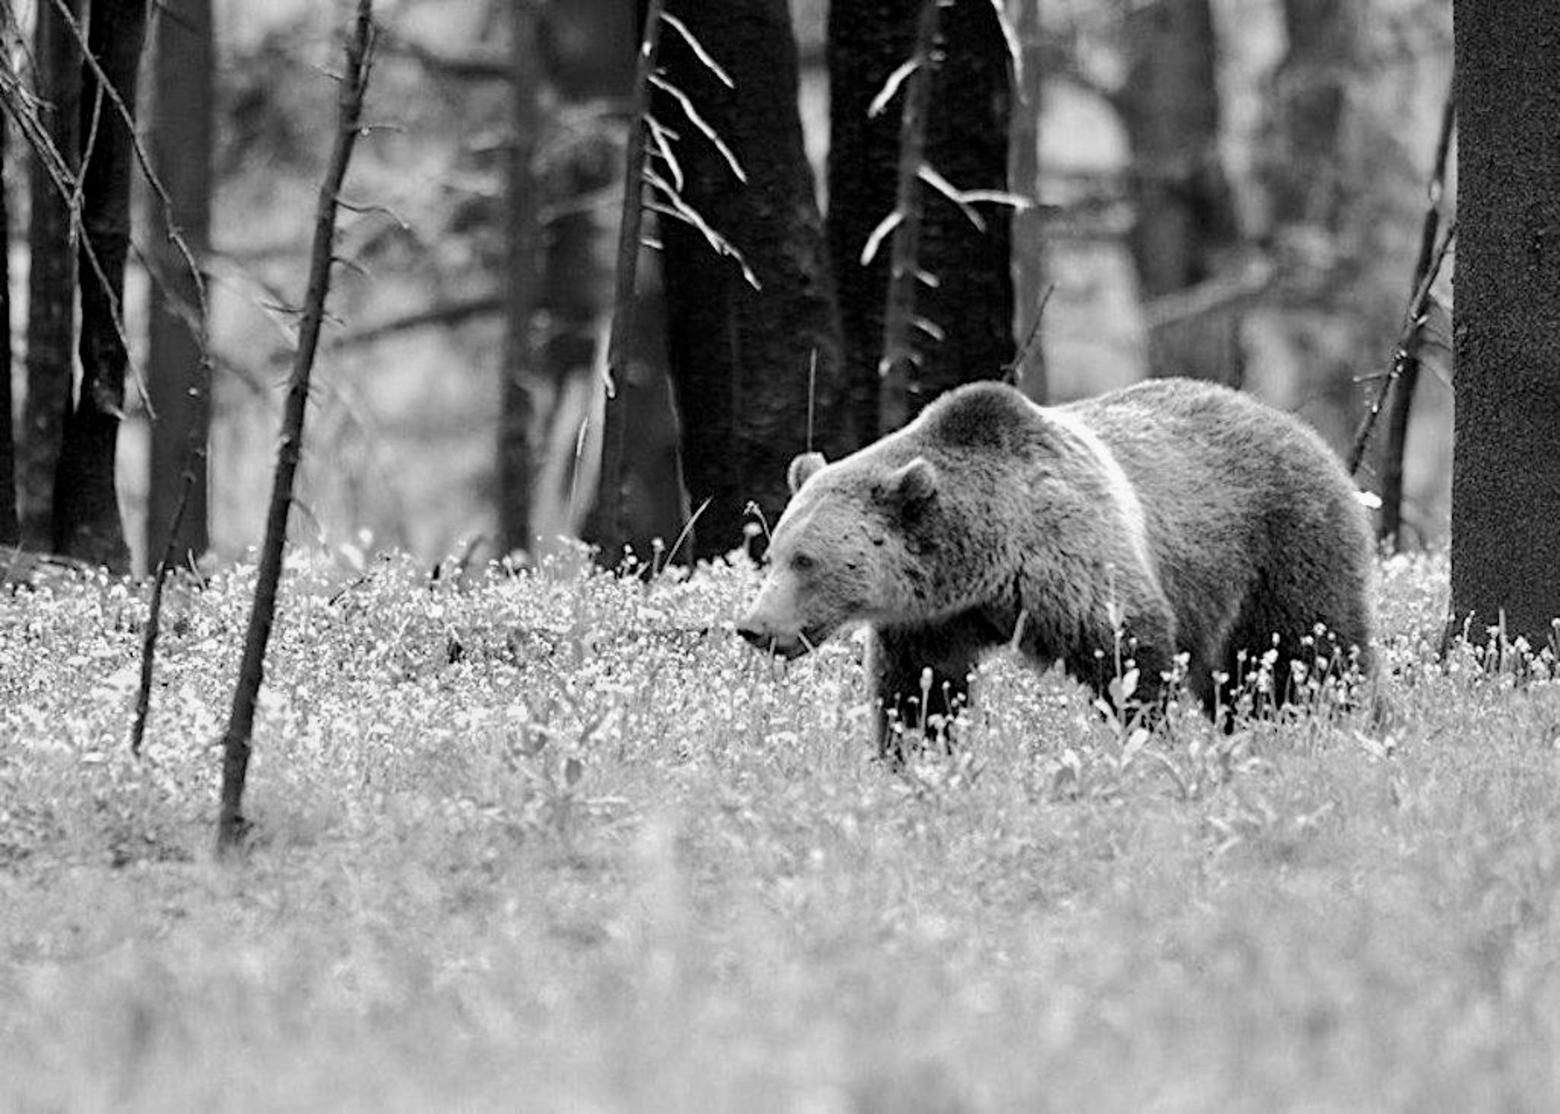 Much of a grizzly's life between coming out of the den and heading back in focuses on finding food. Here, a griz moves through a Northern Rockies forest in search of nutritional sustenance. Photo courtesy NPS